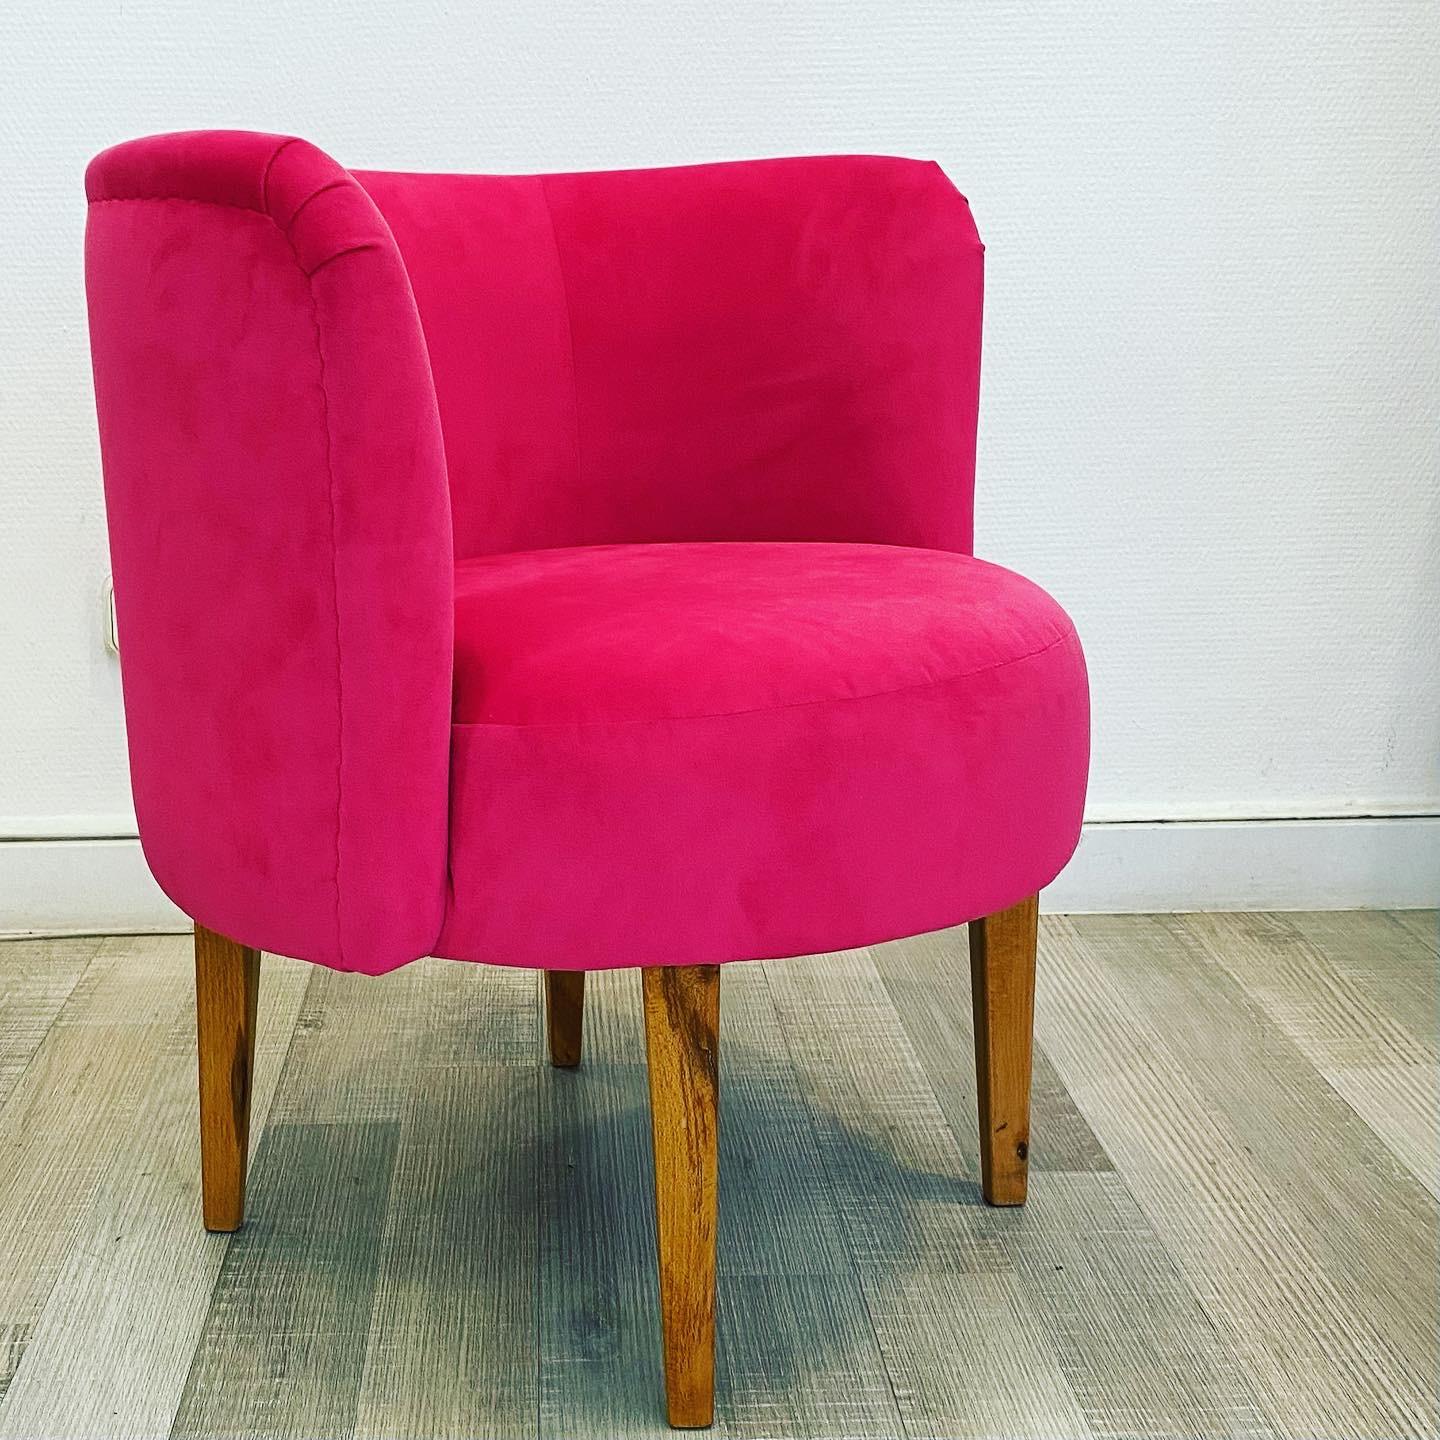 Pair of retro armchairs, 1960's Hungary, reuphlostered, excellent condition. We have another blue pair of  them. Please, check out our sortiment here!